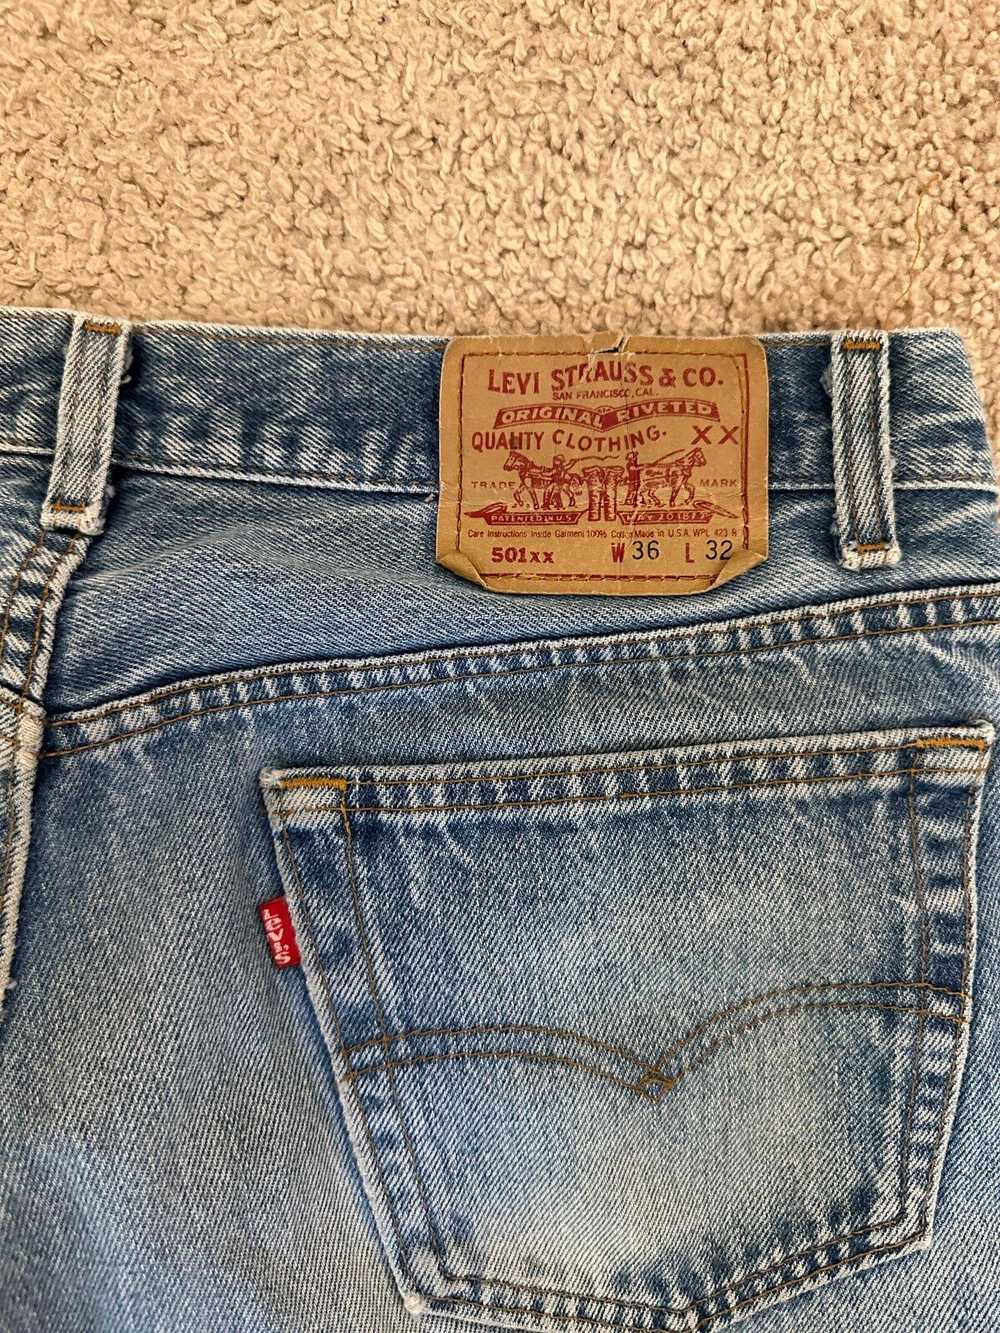 Levi's Vintage Levi’s 501 Made in USA 90’s - image 3